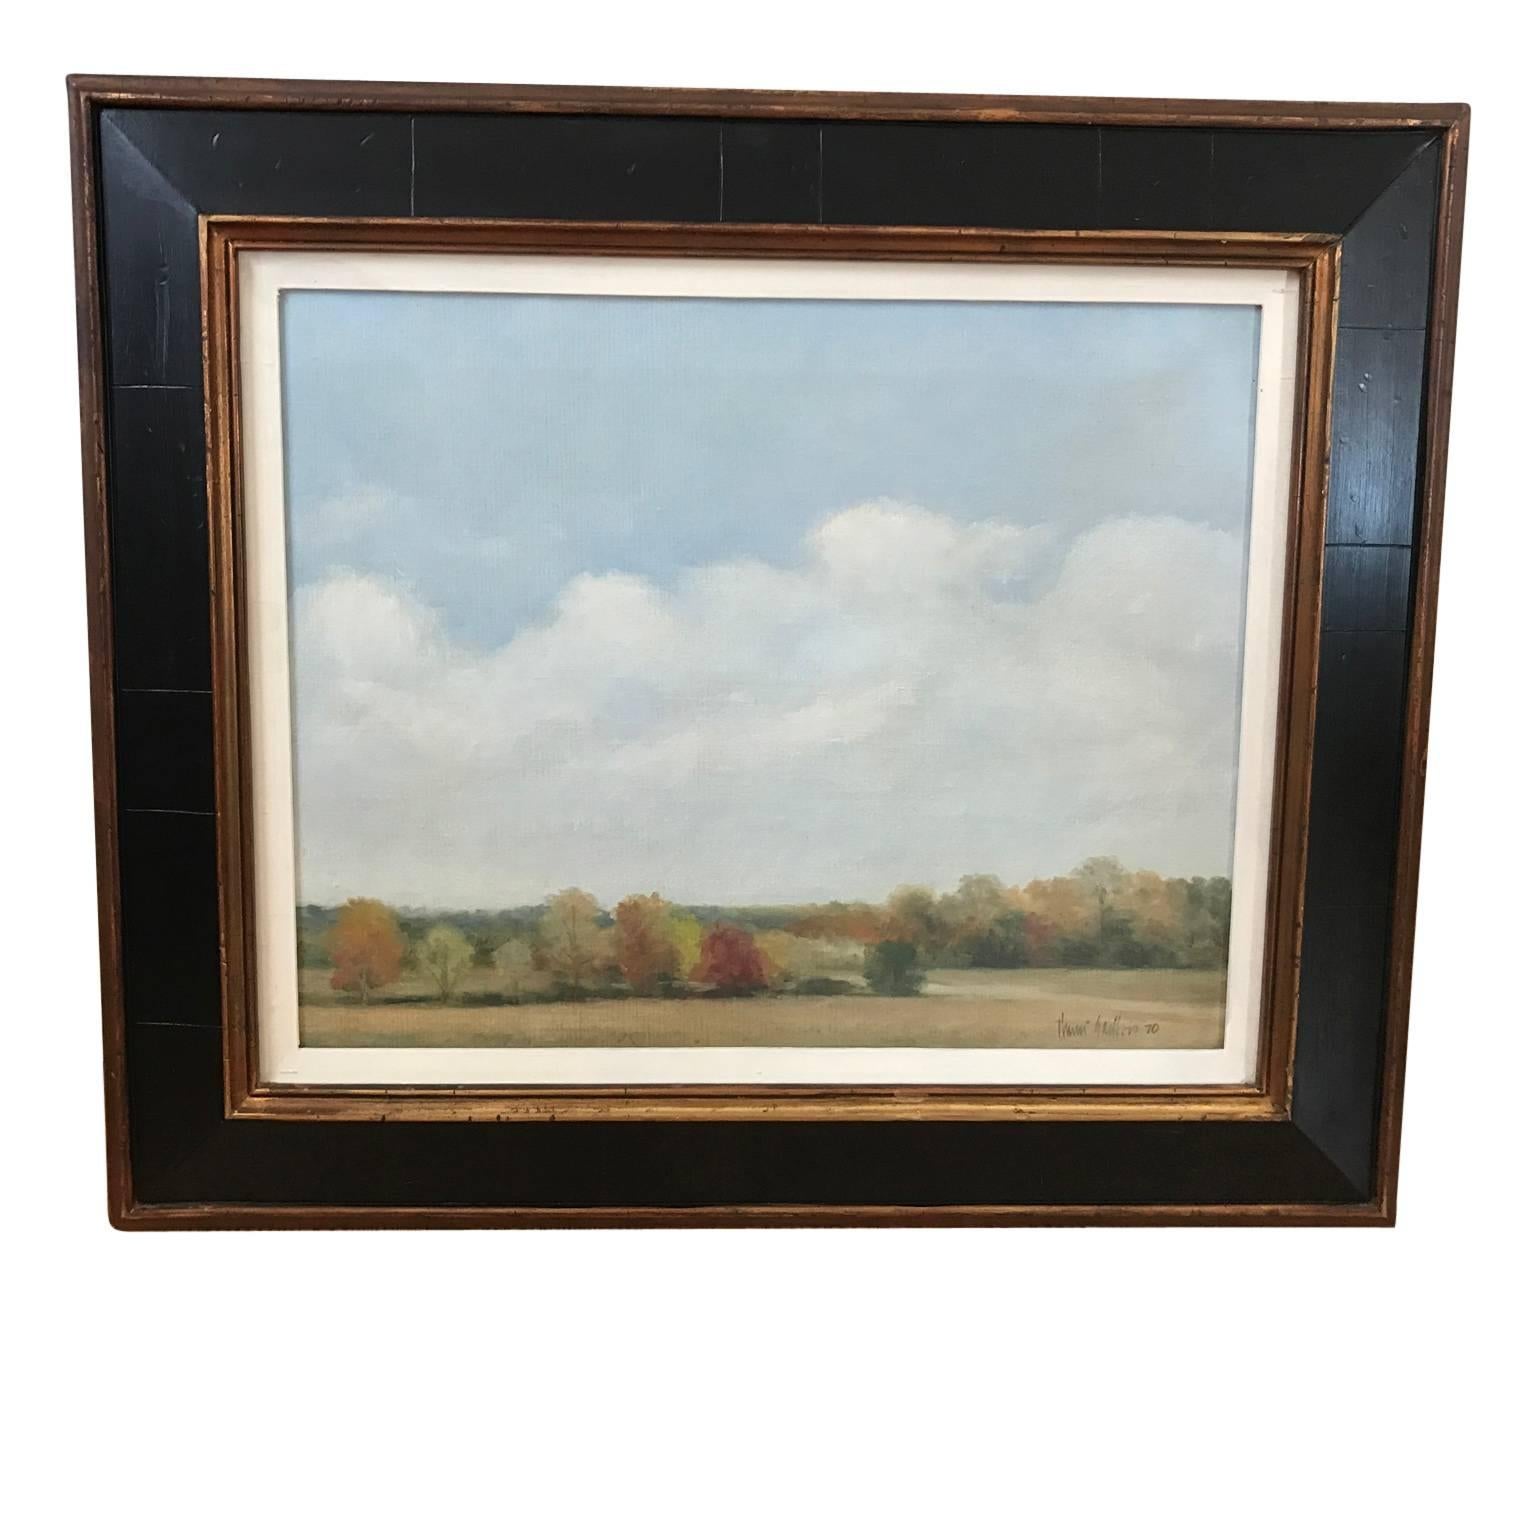 Naturalistic Henri Gadbois Texas sky landscape from the 1970s. The barrenness creates a peaceful tone. Placed in thick black and brown wooden frame. Artist signature in the bottom right corner. 

Artist Biography:
Henri Gadbois is a second